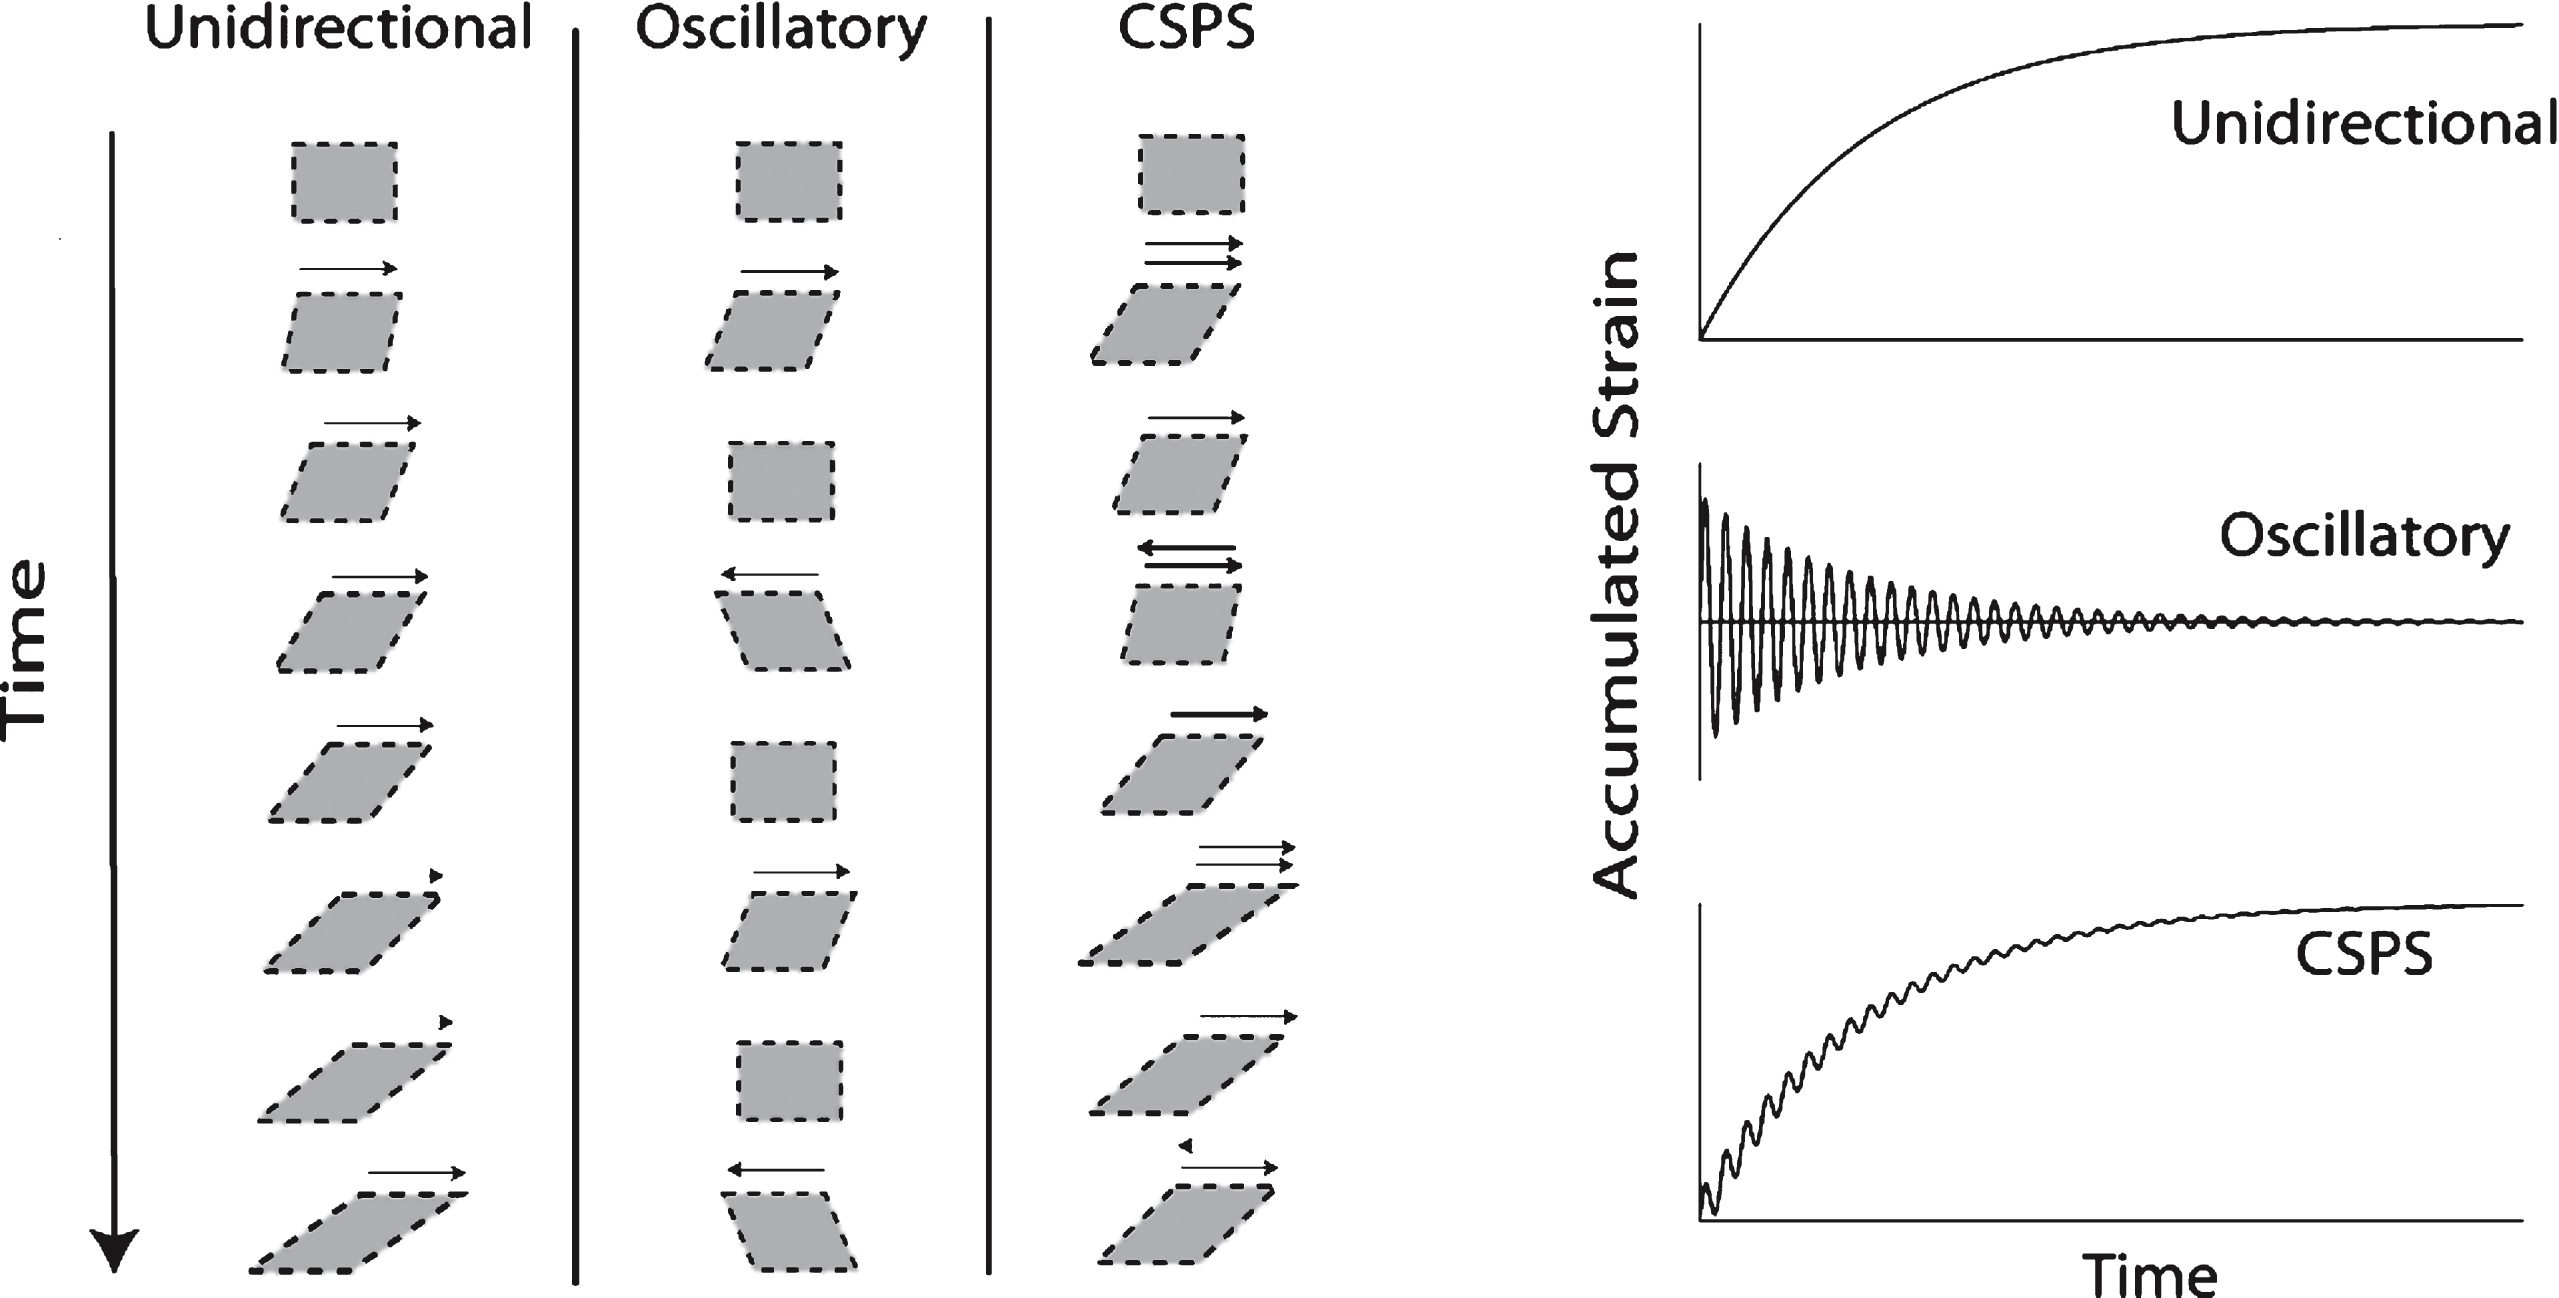 Illustration of CSPS. The technique is used to apply combined unidirectional and oscillatory shear stresses (σs and σo, respectively), the direction of the two resulting shear motions (i.e. the unidirectional and oscillatory components) being parallel (see Fig. 1(i)). The net accumulated unidirectional strain is zero under SAOS whereas it increases progressively in CSPS (Fig. 1(ii)). The SAOS strain decreases progressively in blood as the GP is approached. CSPS involves a time-varying shear rate under constant stress due to rheological changes associated with clotting. The unidirectional flow shear rate becomes vanishingly small in the vicinity of the GP.